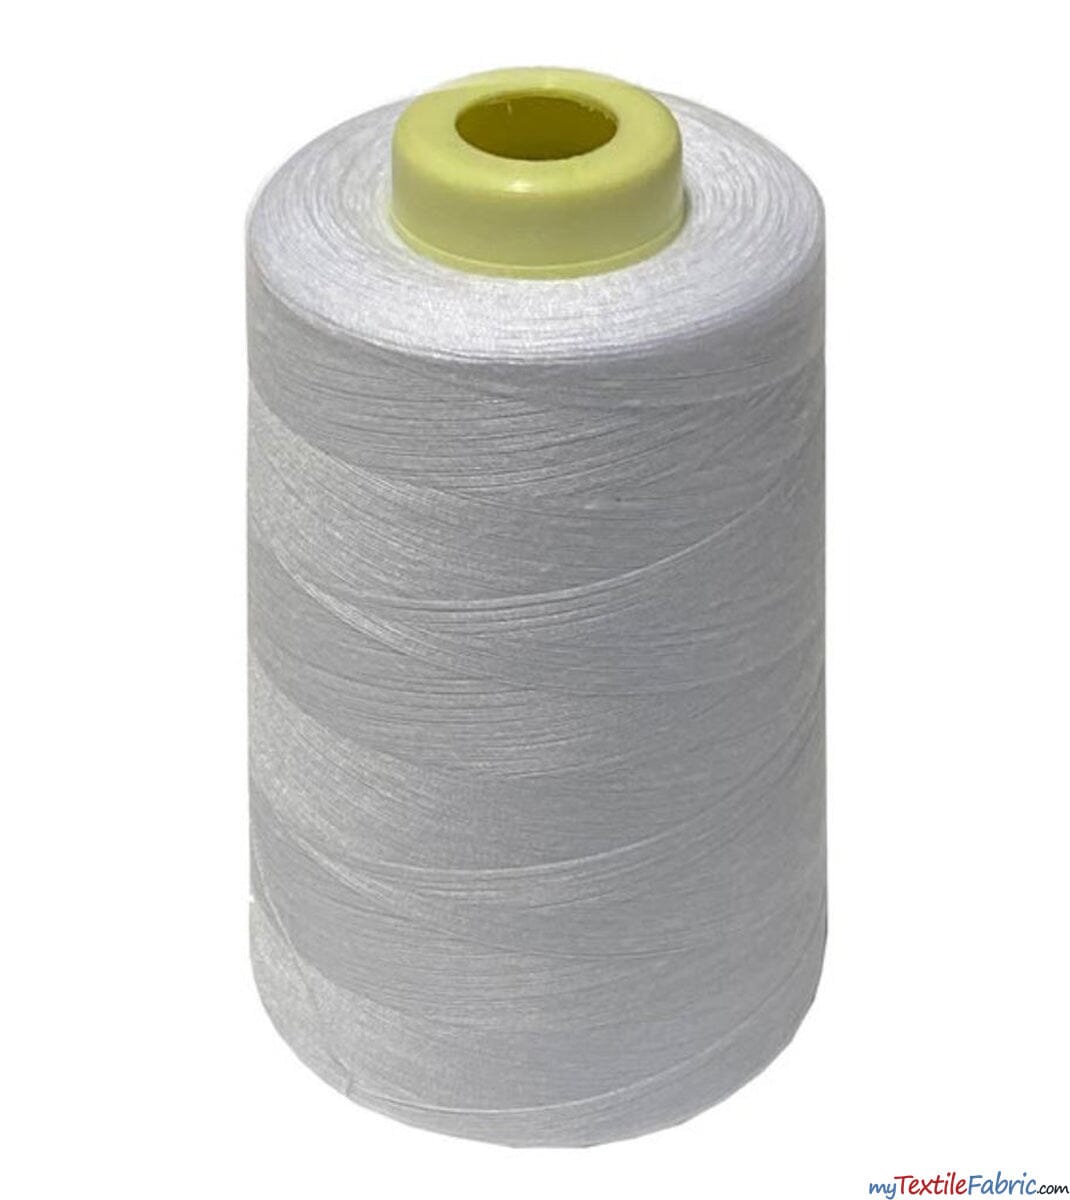 All Purpose Polyester Thread | 6000 Yard Spool | 50 + Colors Available | My Textile Fabric 